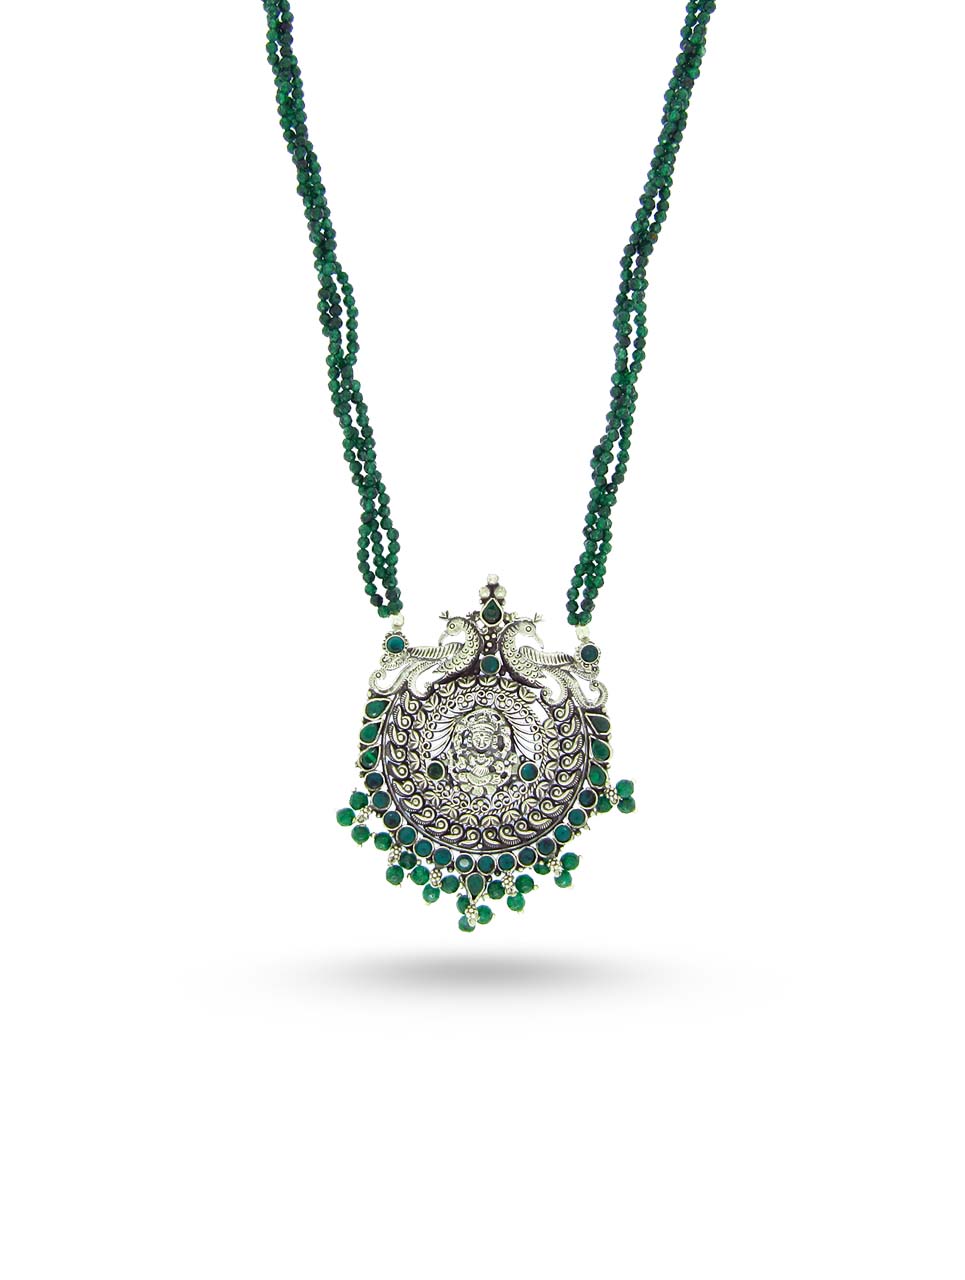 IBAADAT NECKLACE WITHOUT EARRINGS (STYLE 751)